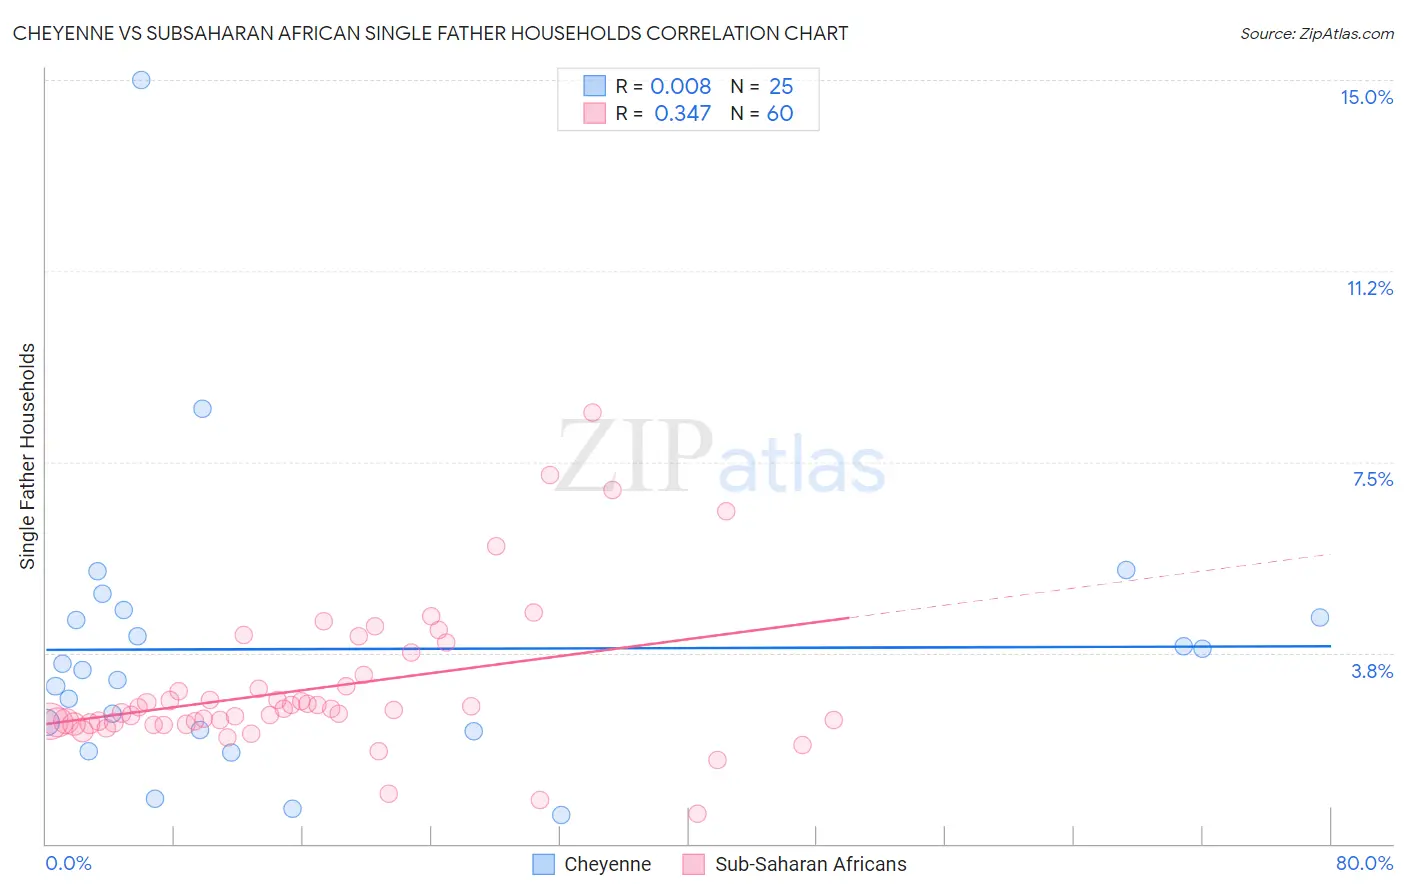 Cheyenne vs Subsaharan African Single Father Households